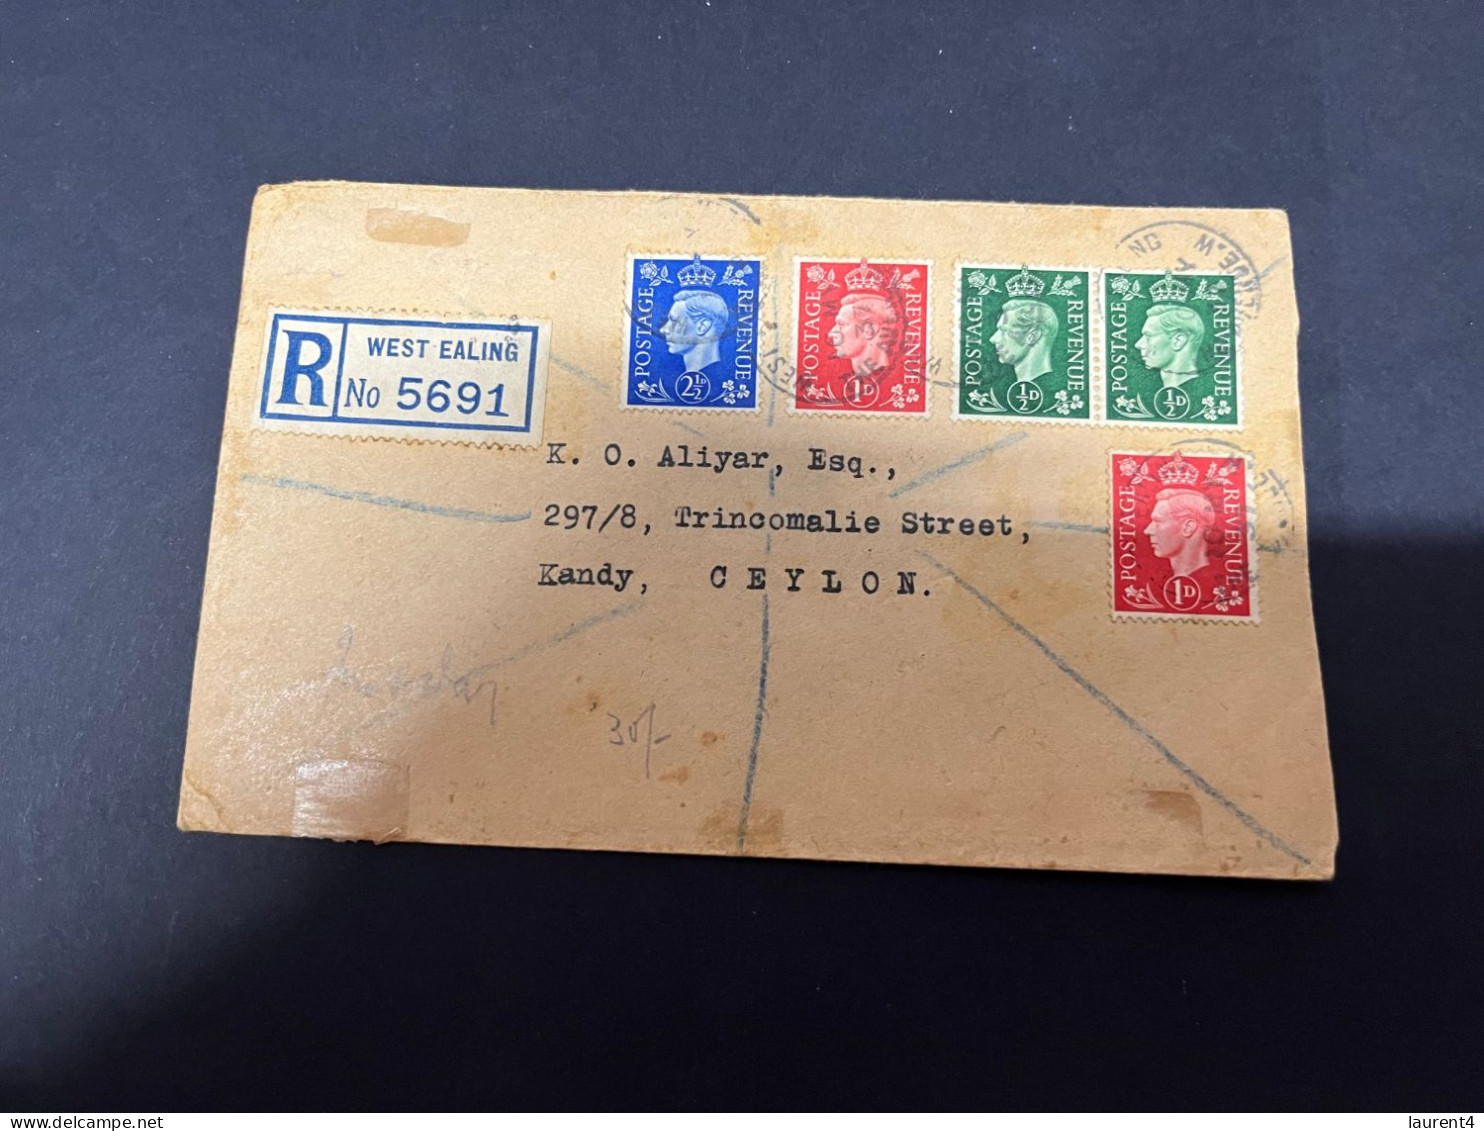 2-10-2023 (3 U 10) UK - Registered Cover Posted From West Ealing To Ceylon (now Called Sri Lanka) - 1937 - Covers & Documents